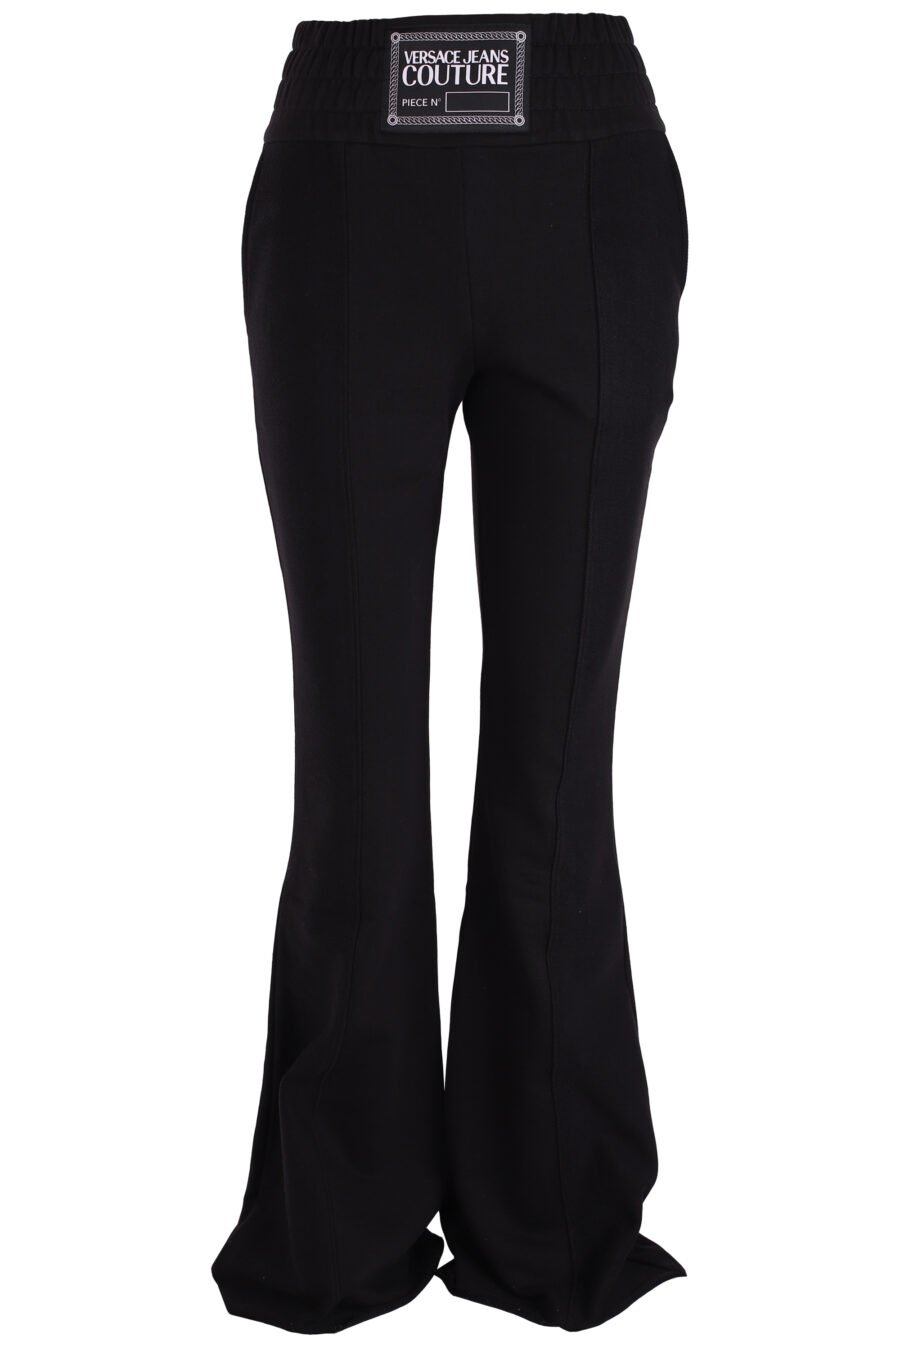 Versace Jeans Couture Flare Dress Pant